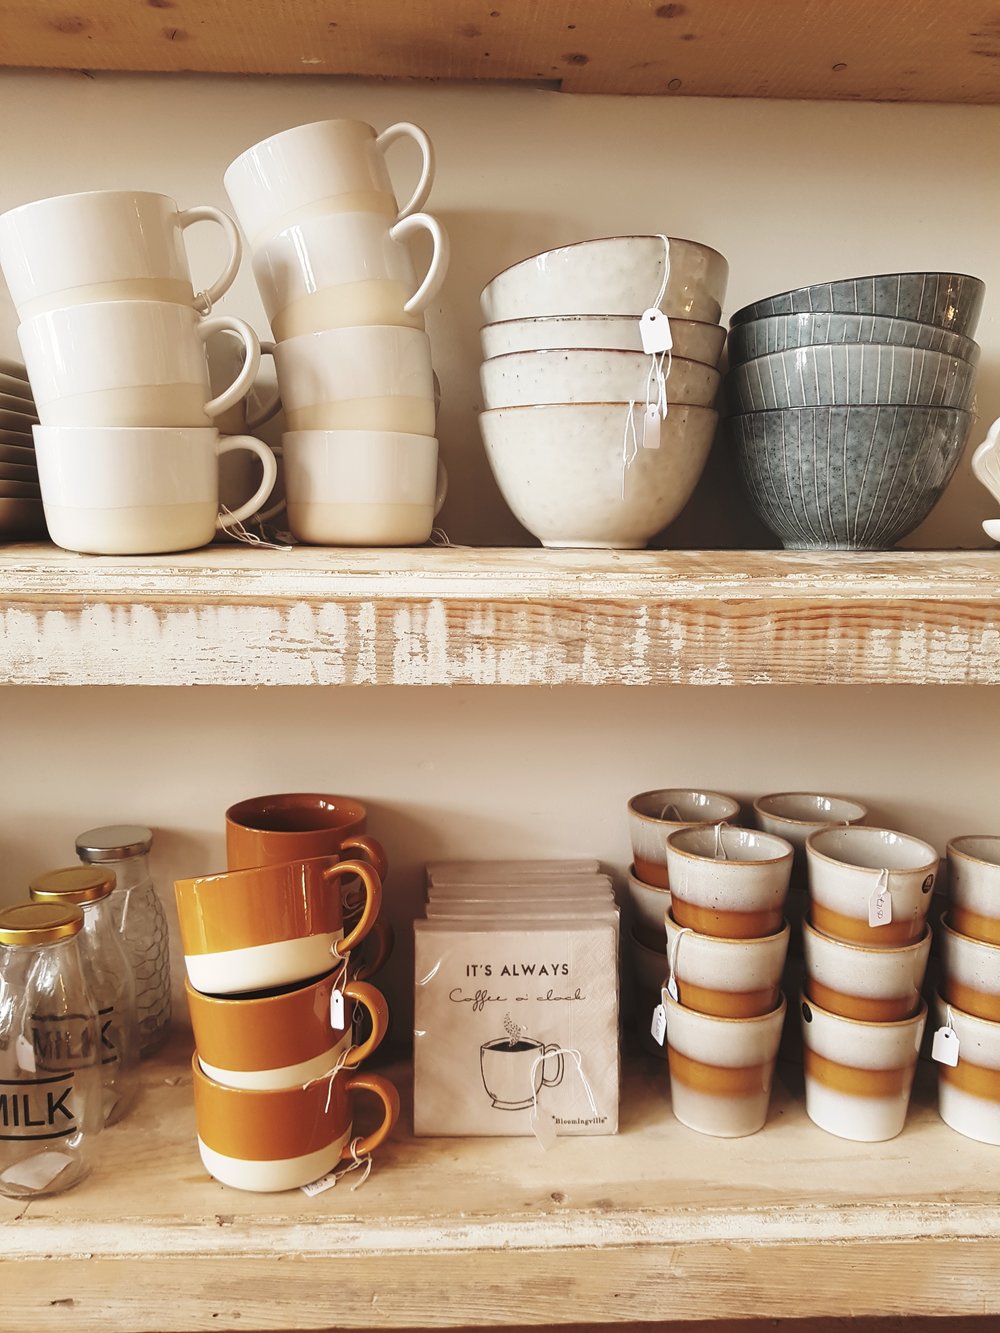  And there was lots of lovely home ware to tempt you over your cup of tea 